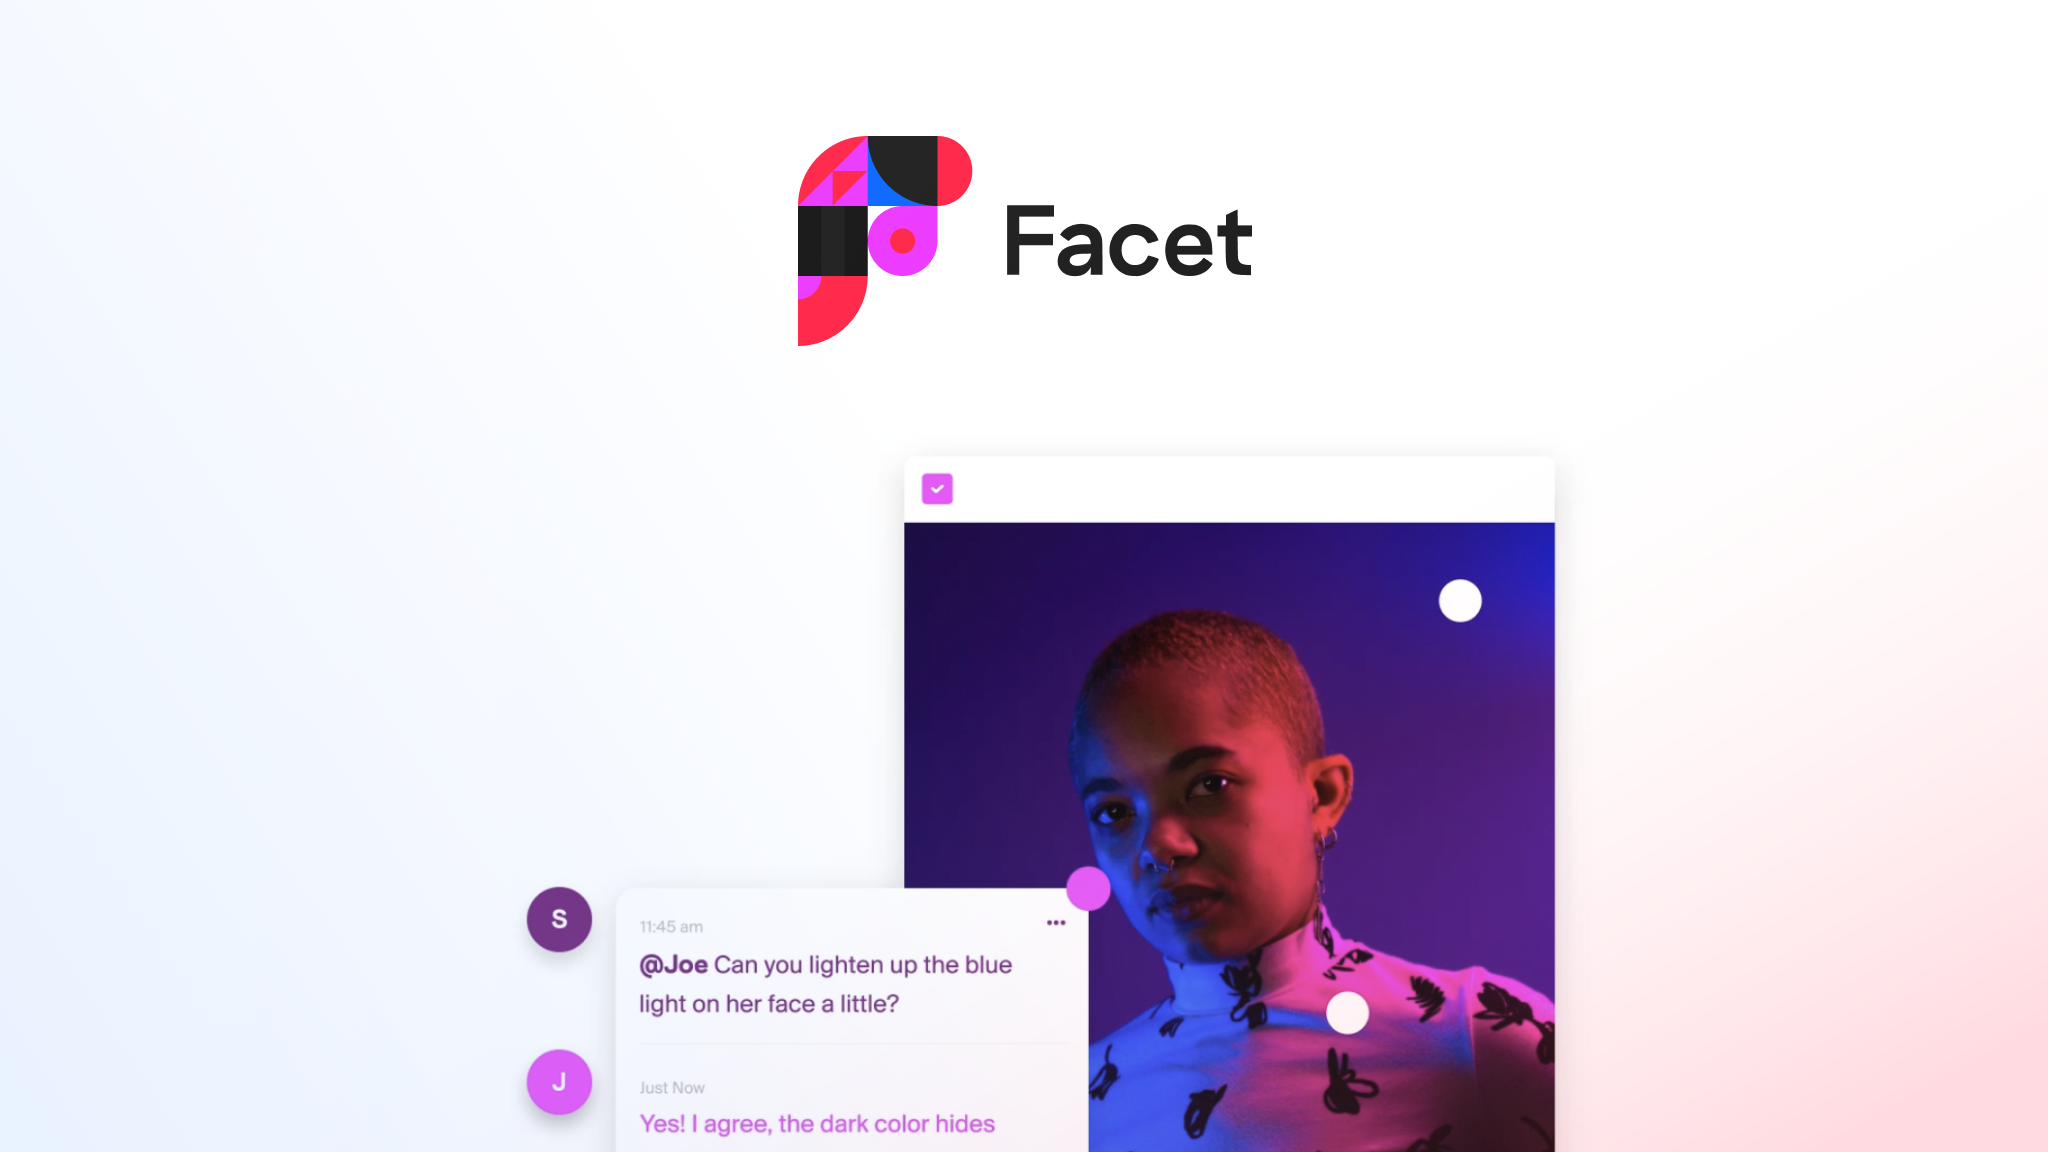 Facet.ai rolled out a brand-new collaborative product within a few weeks